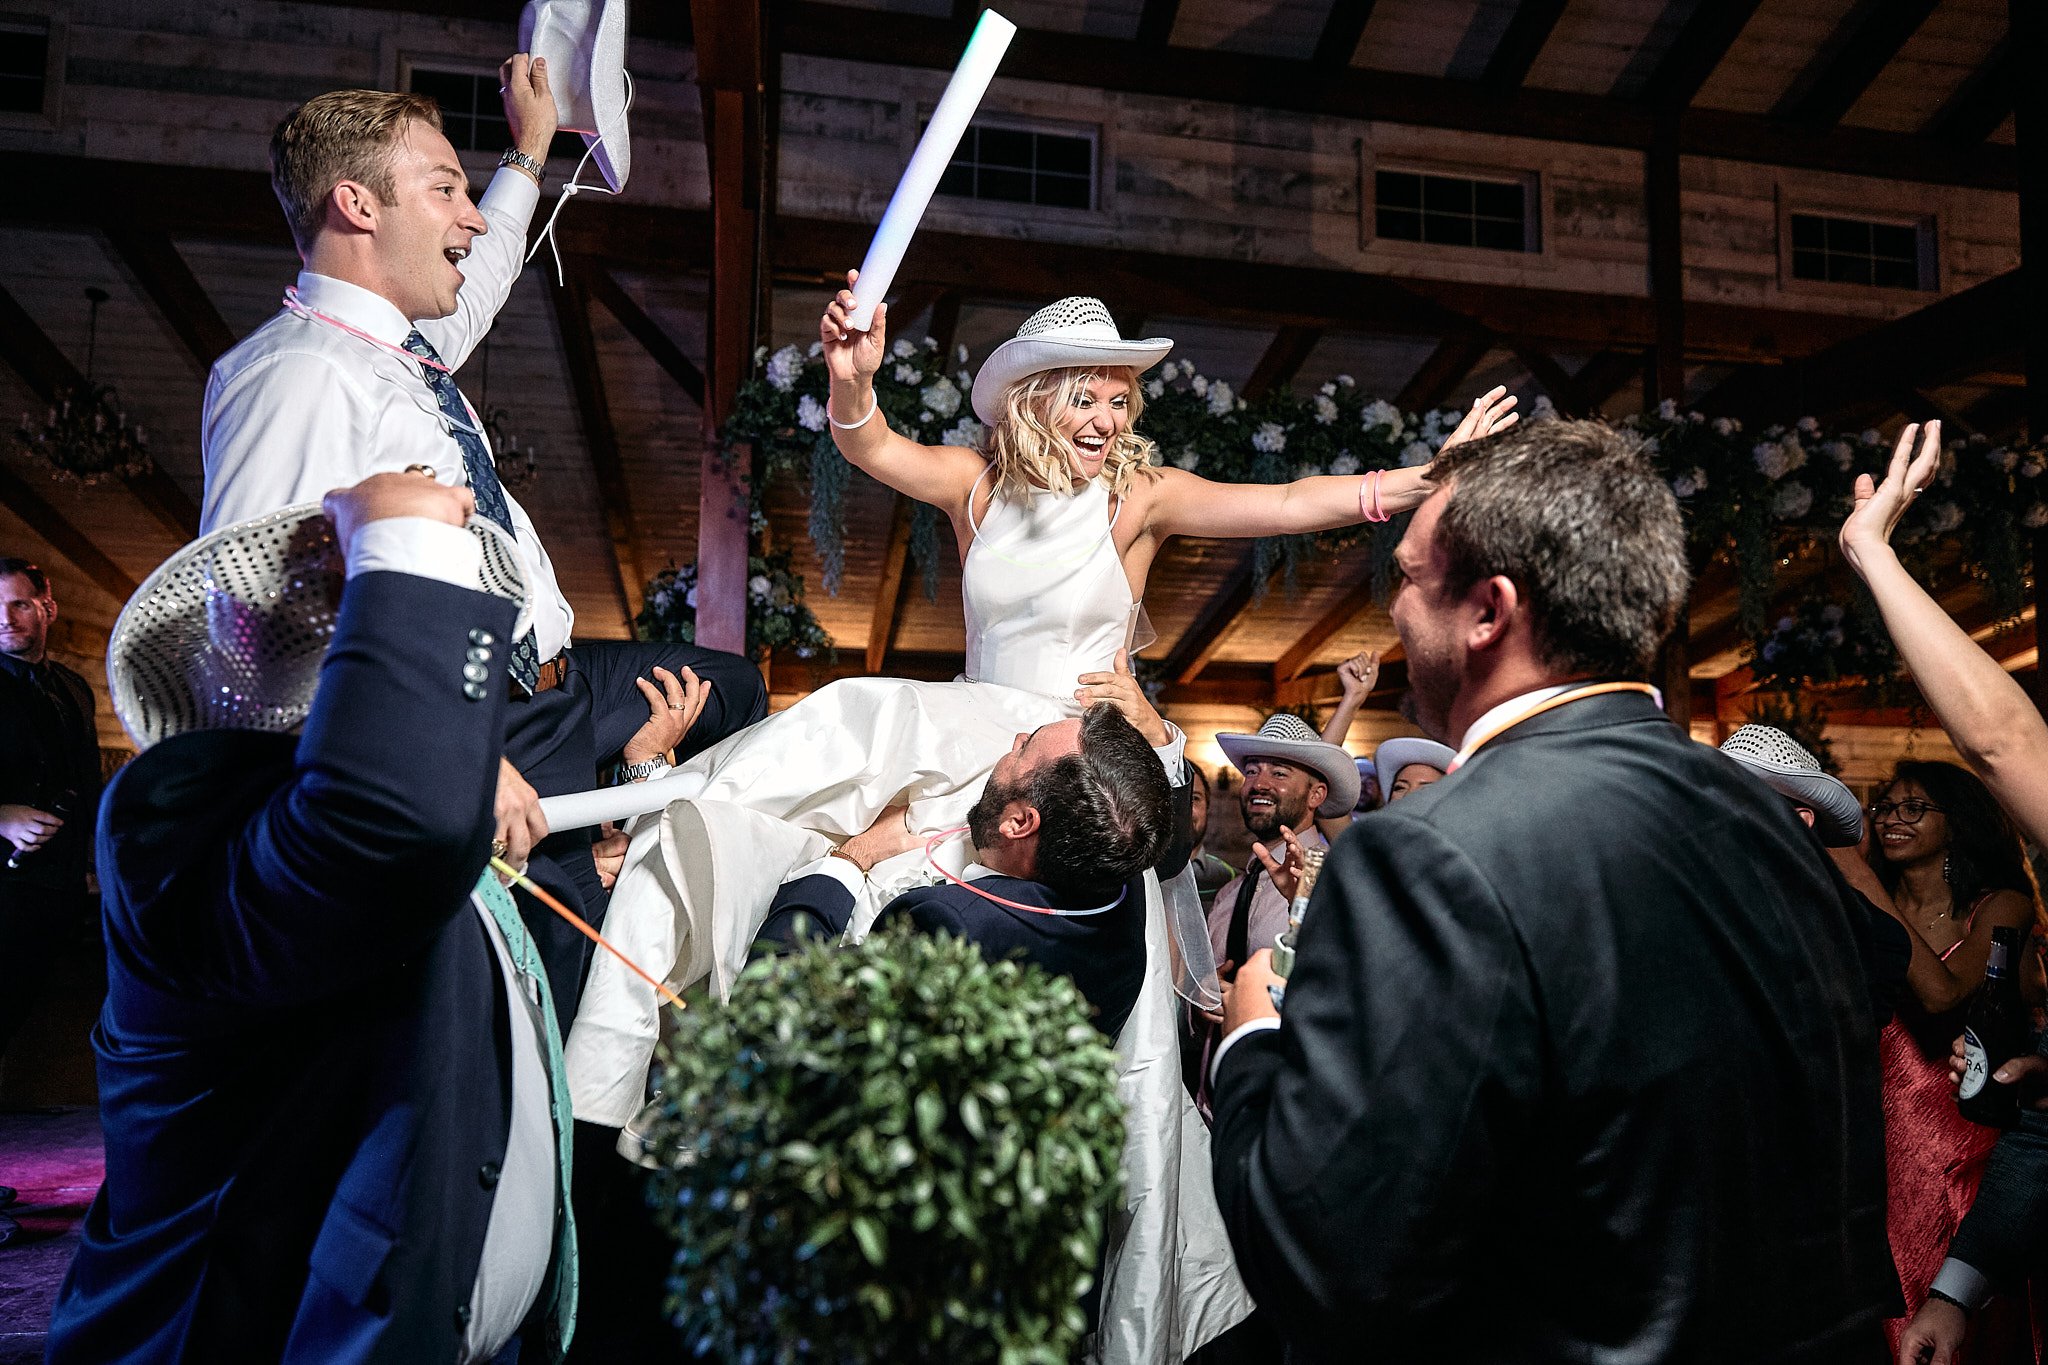 couple is held up by their wedding party during their wedding reception